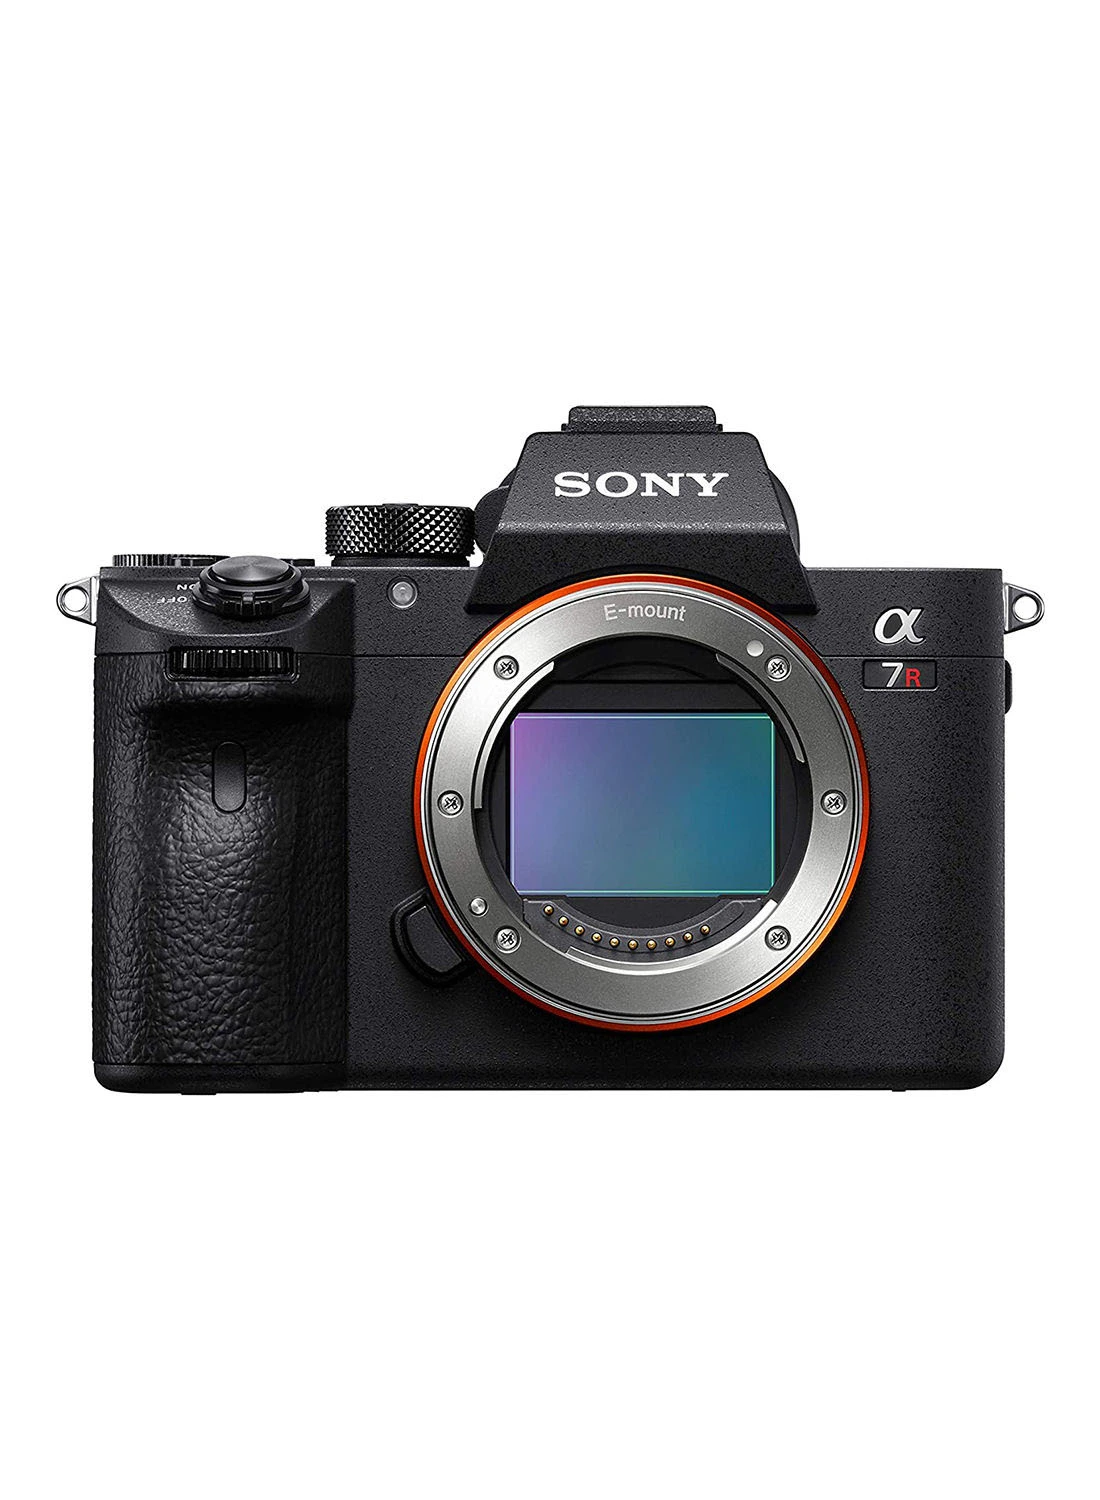 Sony Alpha a7R III Full Frame Mirrorless Camera - Body Only, Black, ILCE-7RM3A/B